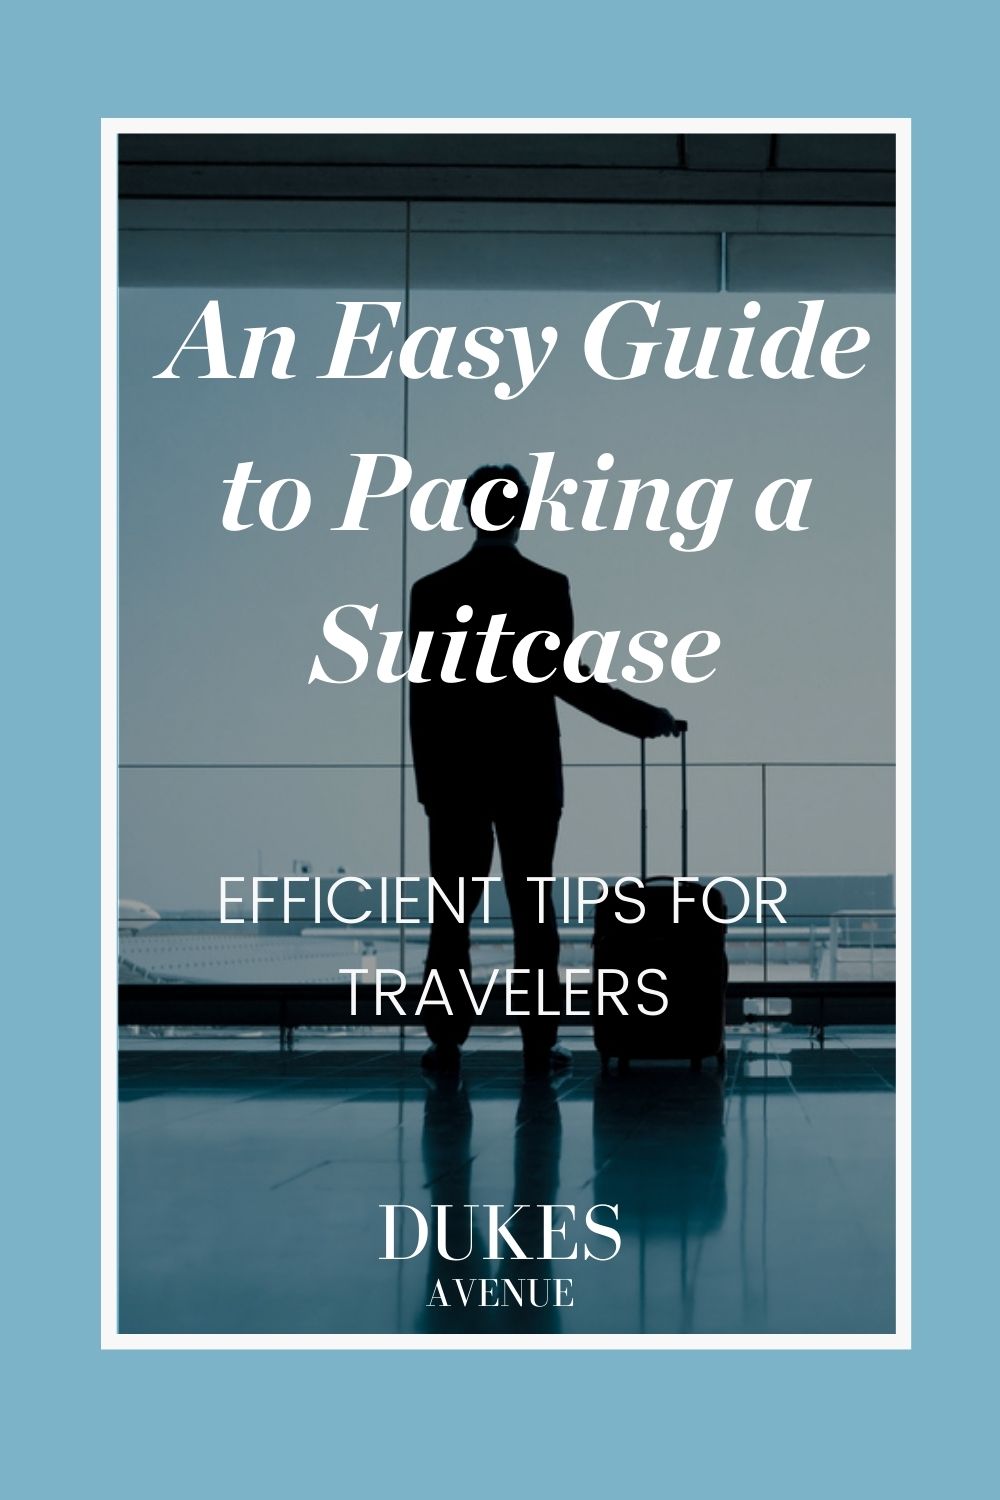 Image of man holding suitcase at the airport with text overlay 'An Easy Guide to Packing a Suitcase'